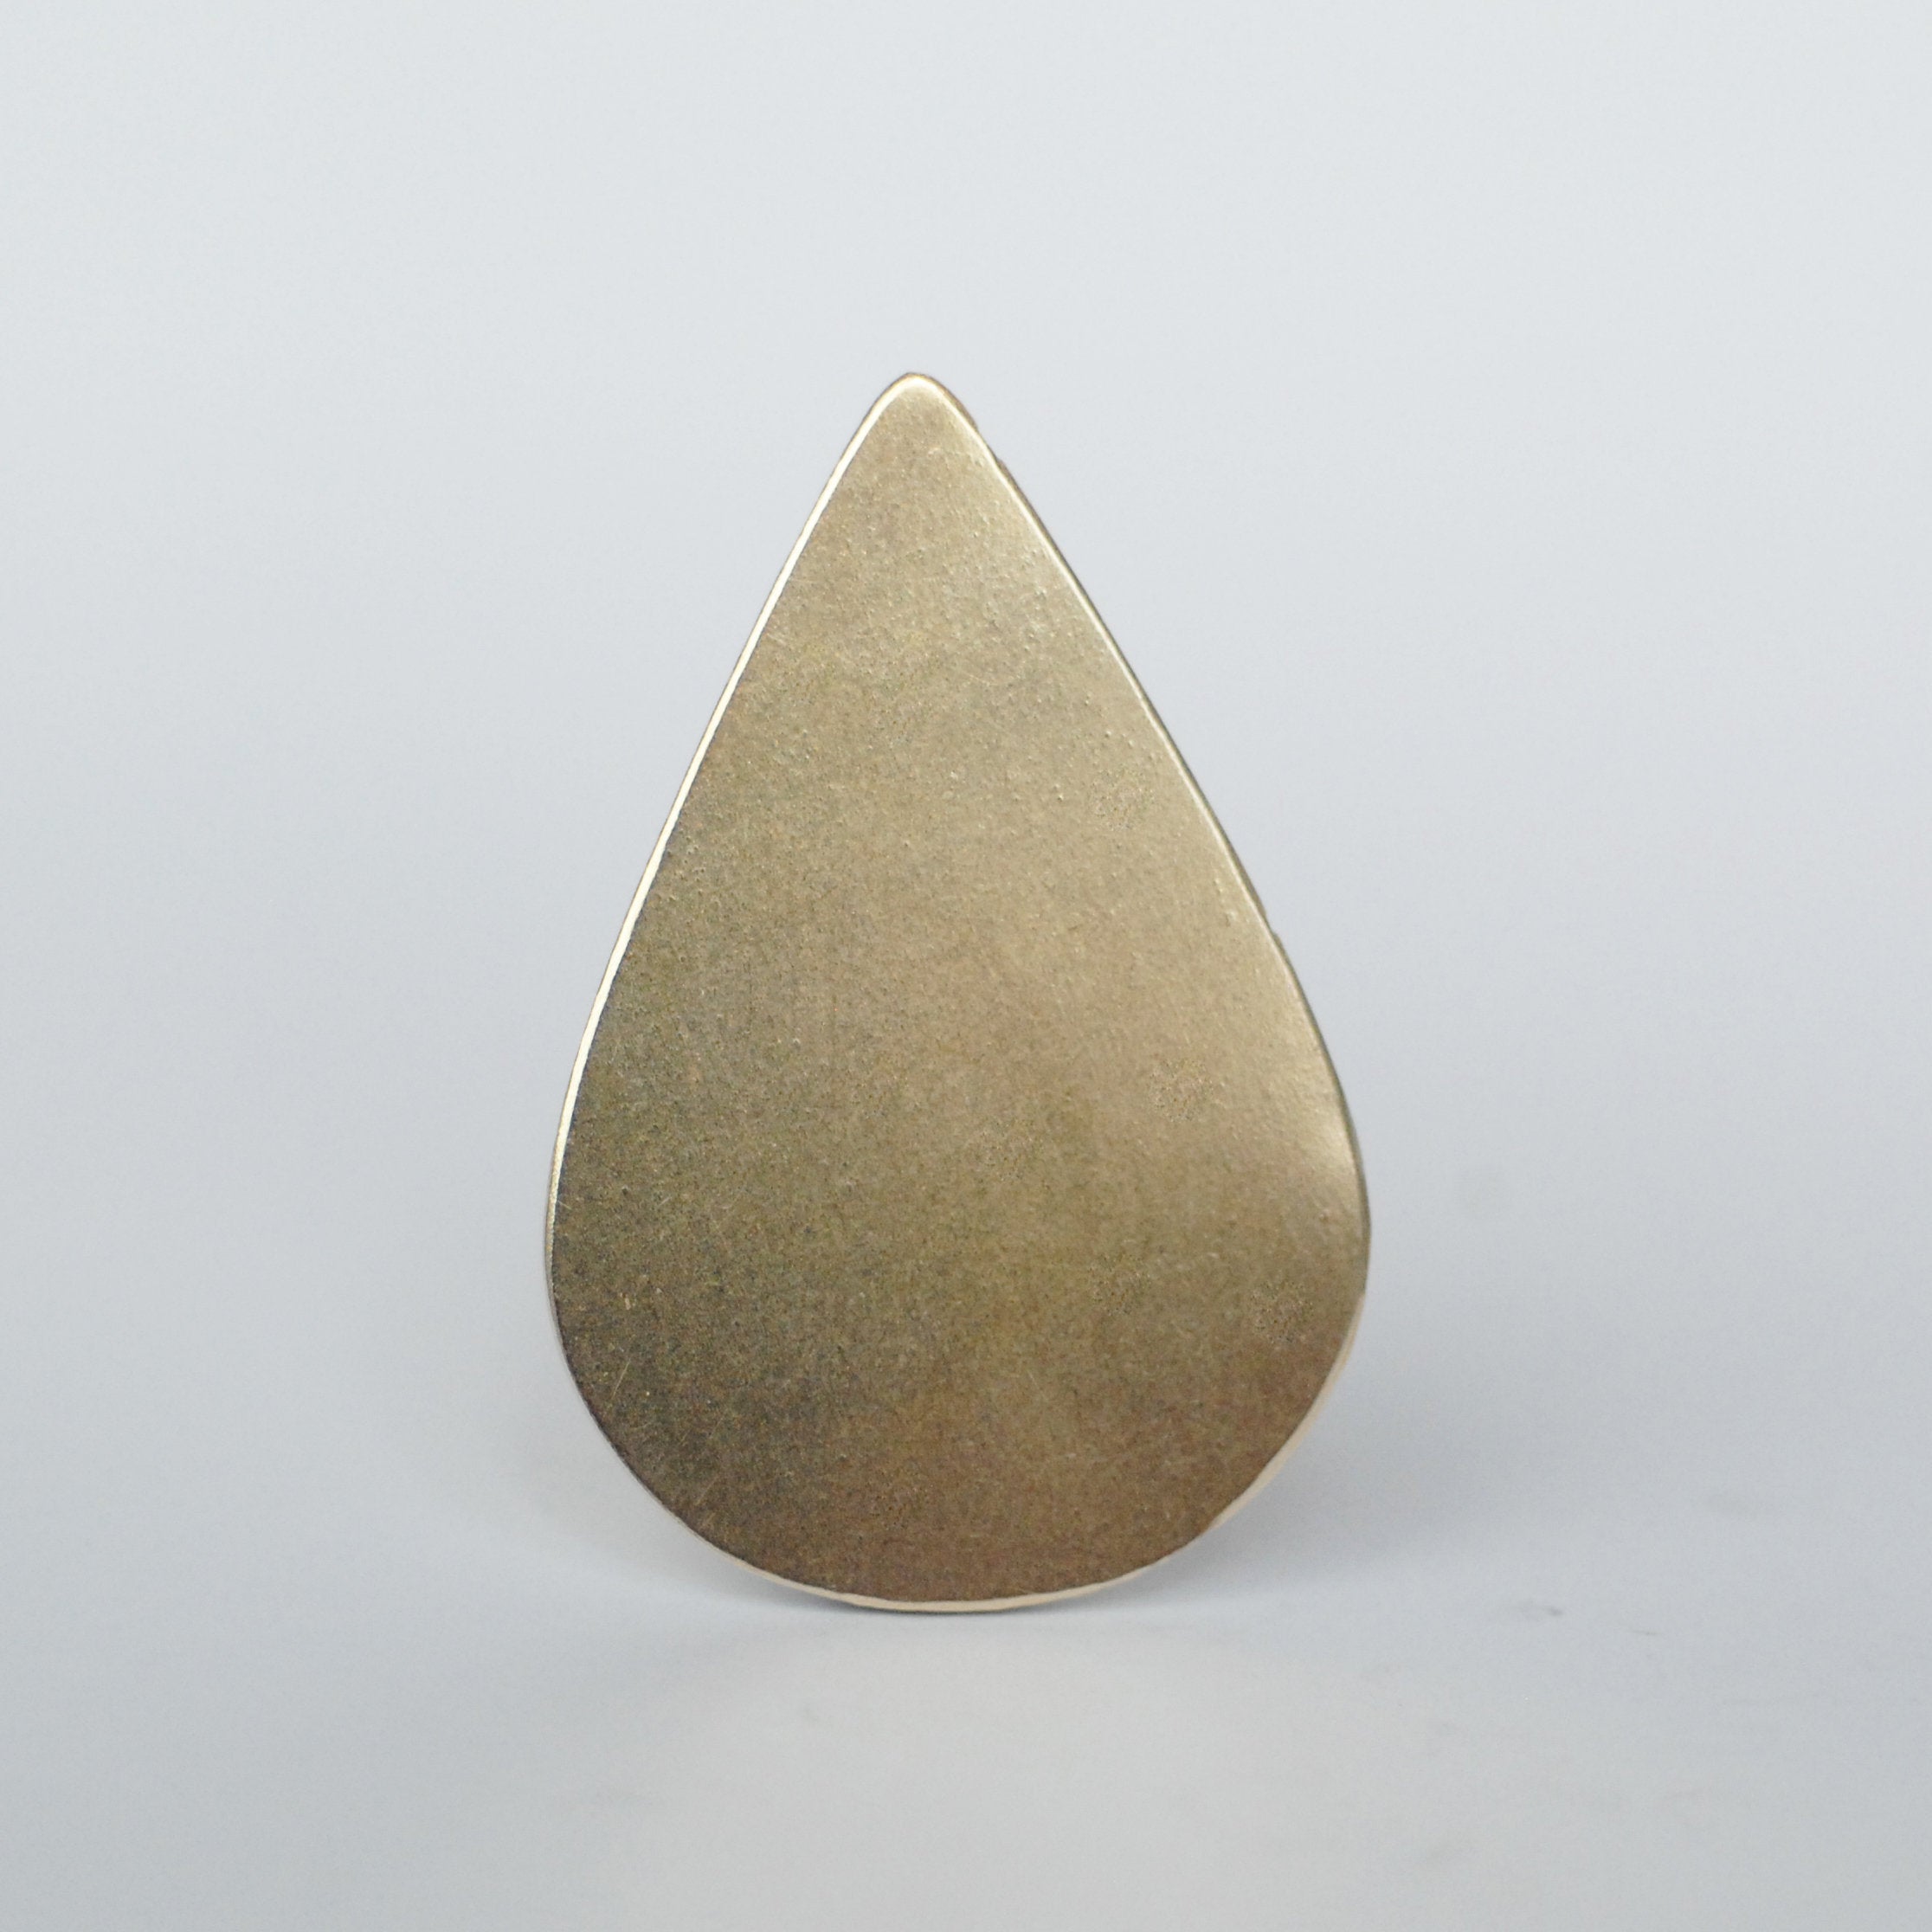 Large Pointed Teardrop 51mm x 34mm metal blanks for making jewelry Solid copper, brass, bronze, nickel silver